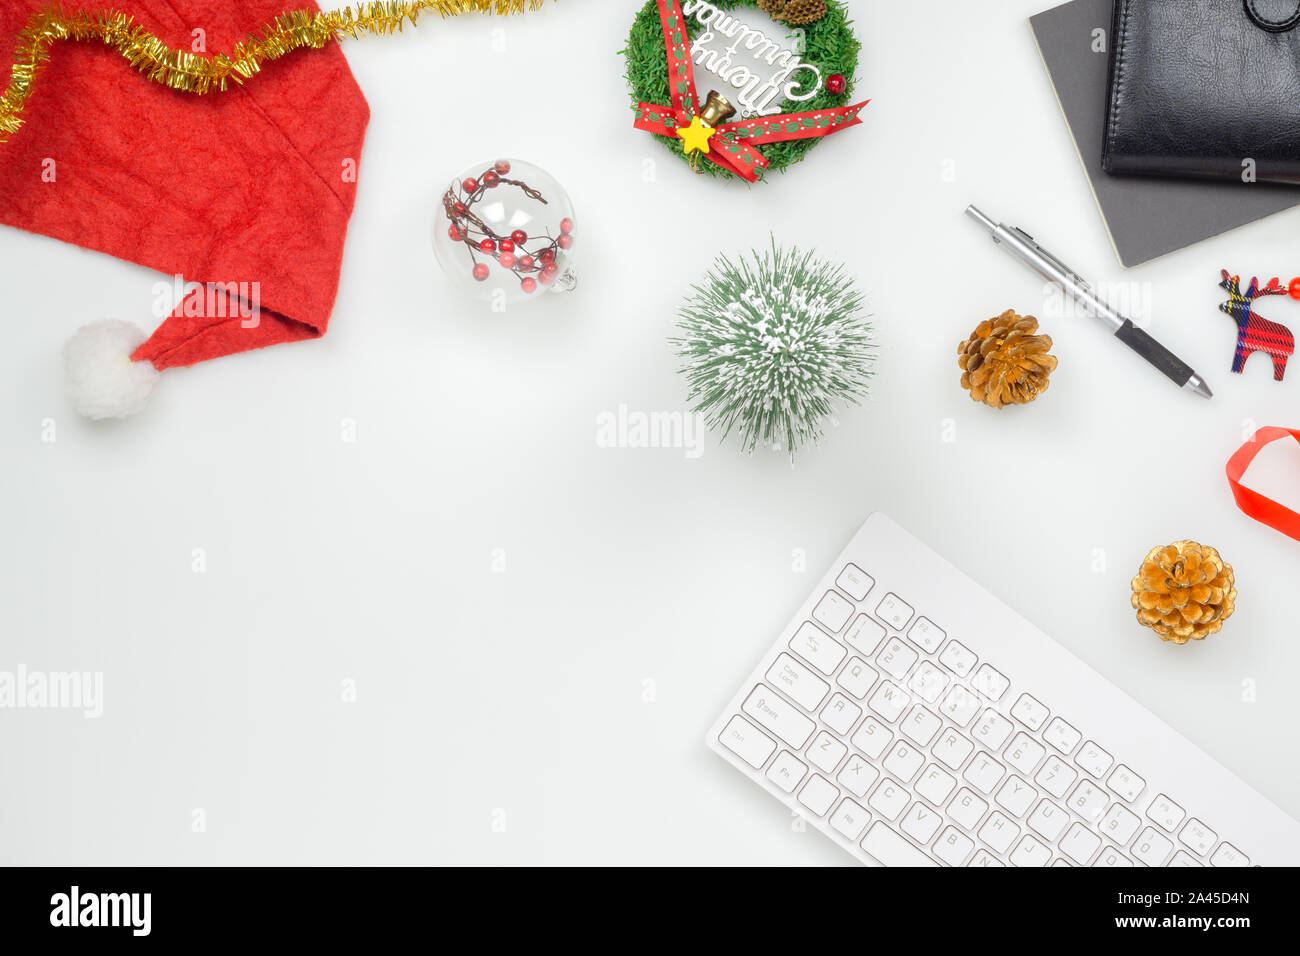 Flat lay top view office table desk, Christmas workspace with keyboard, Santa Claus hat and christmas decorations on white background Stock Photo